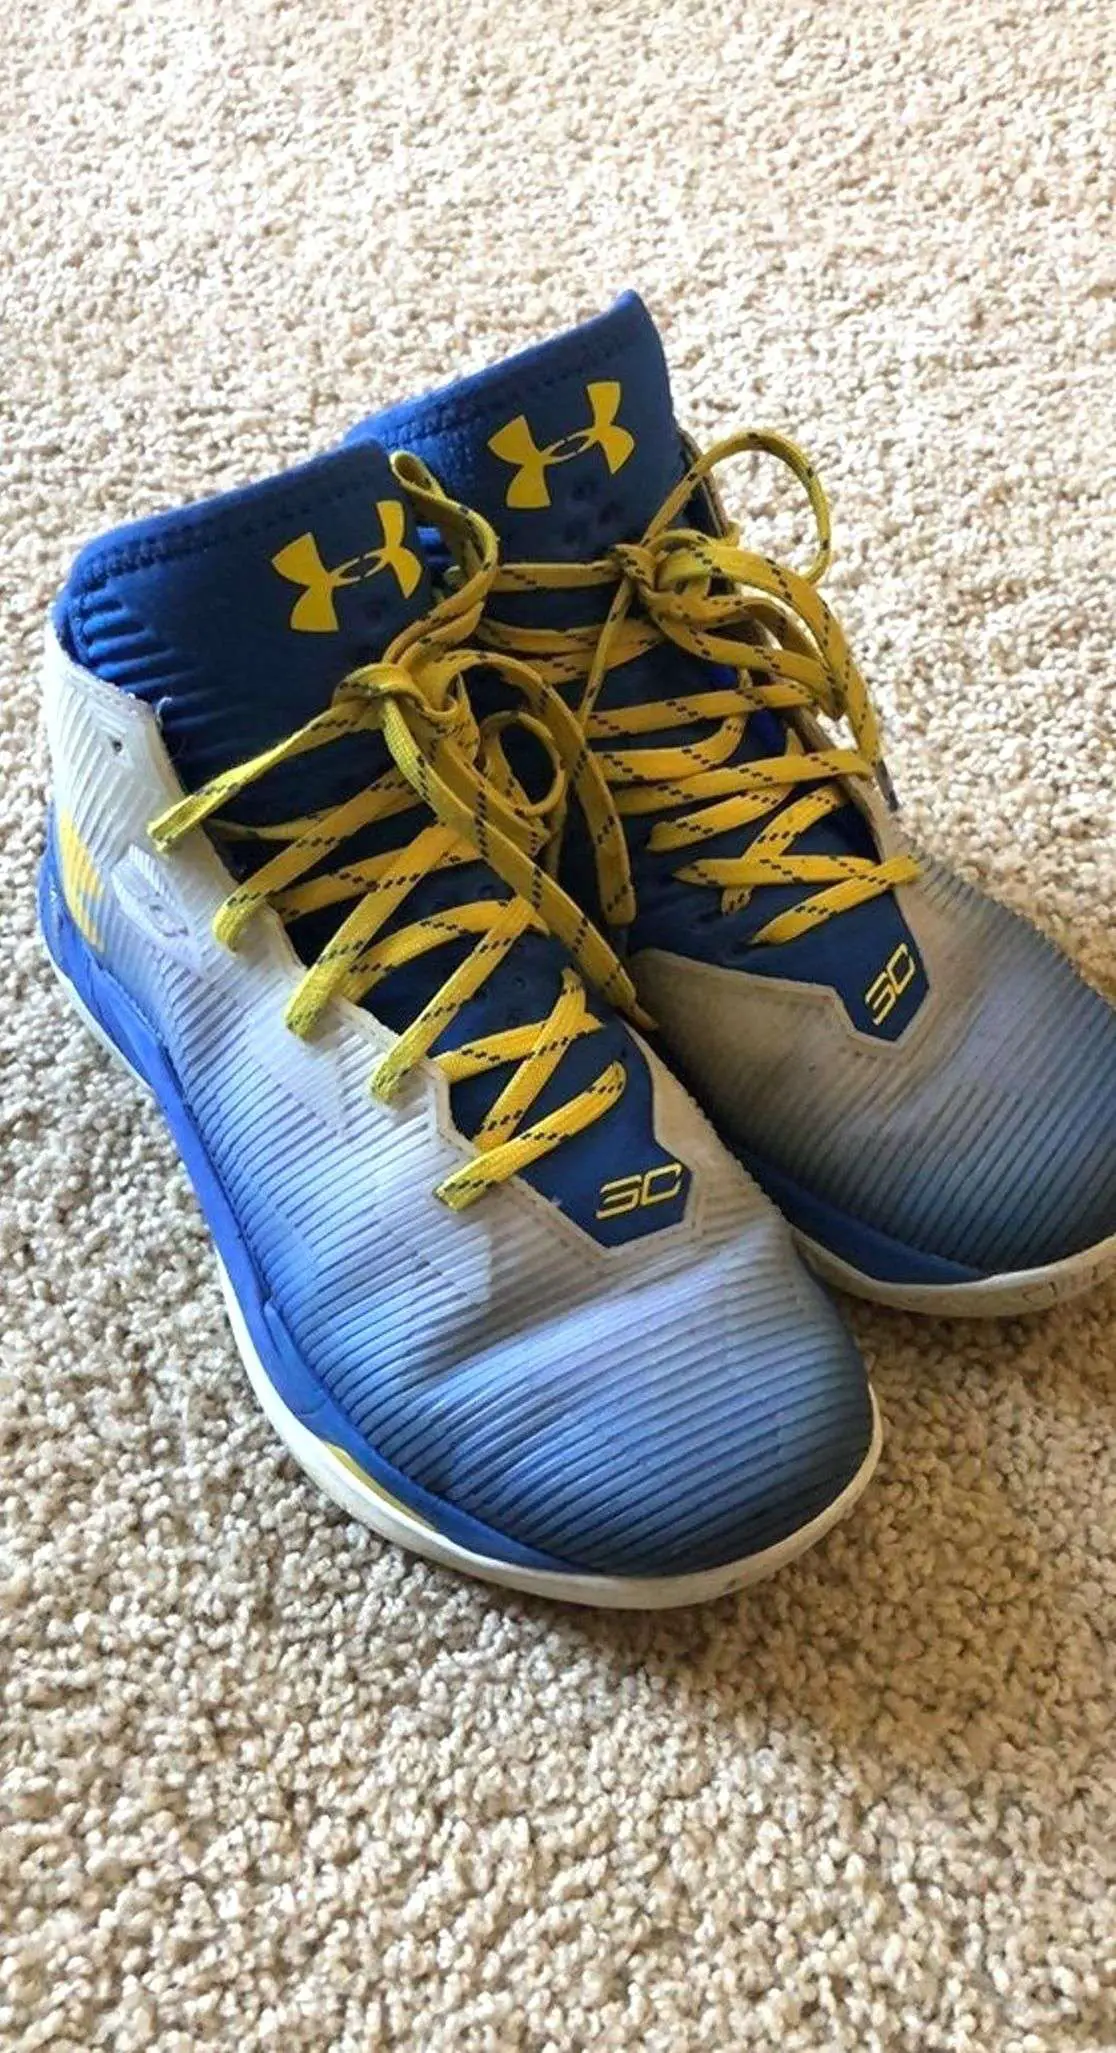 Under Armour Stephen Curry 25 basketball shoes Mens size ...